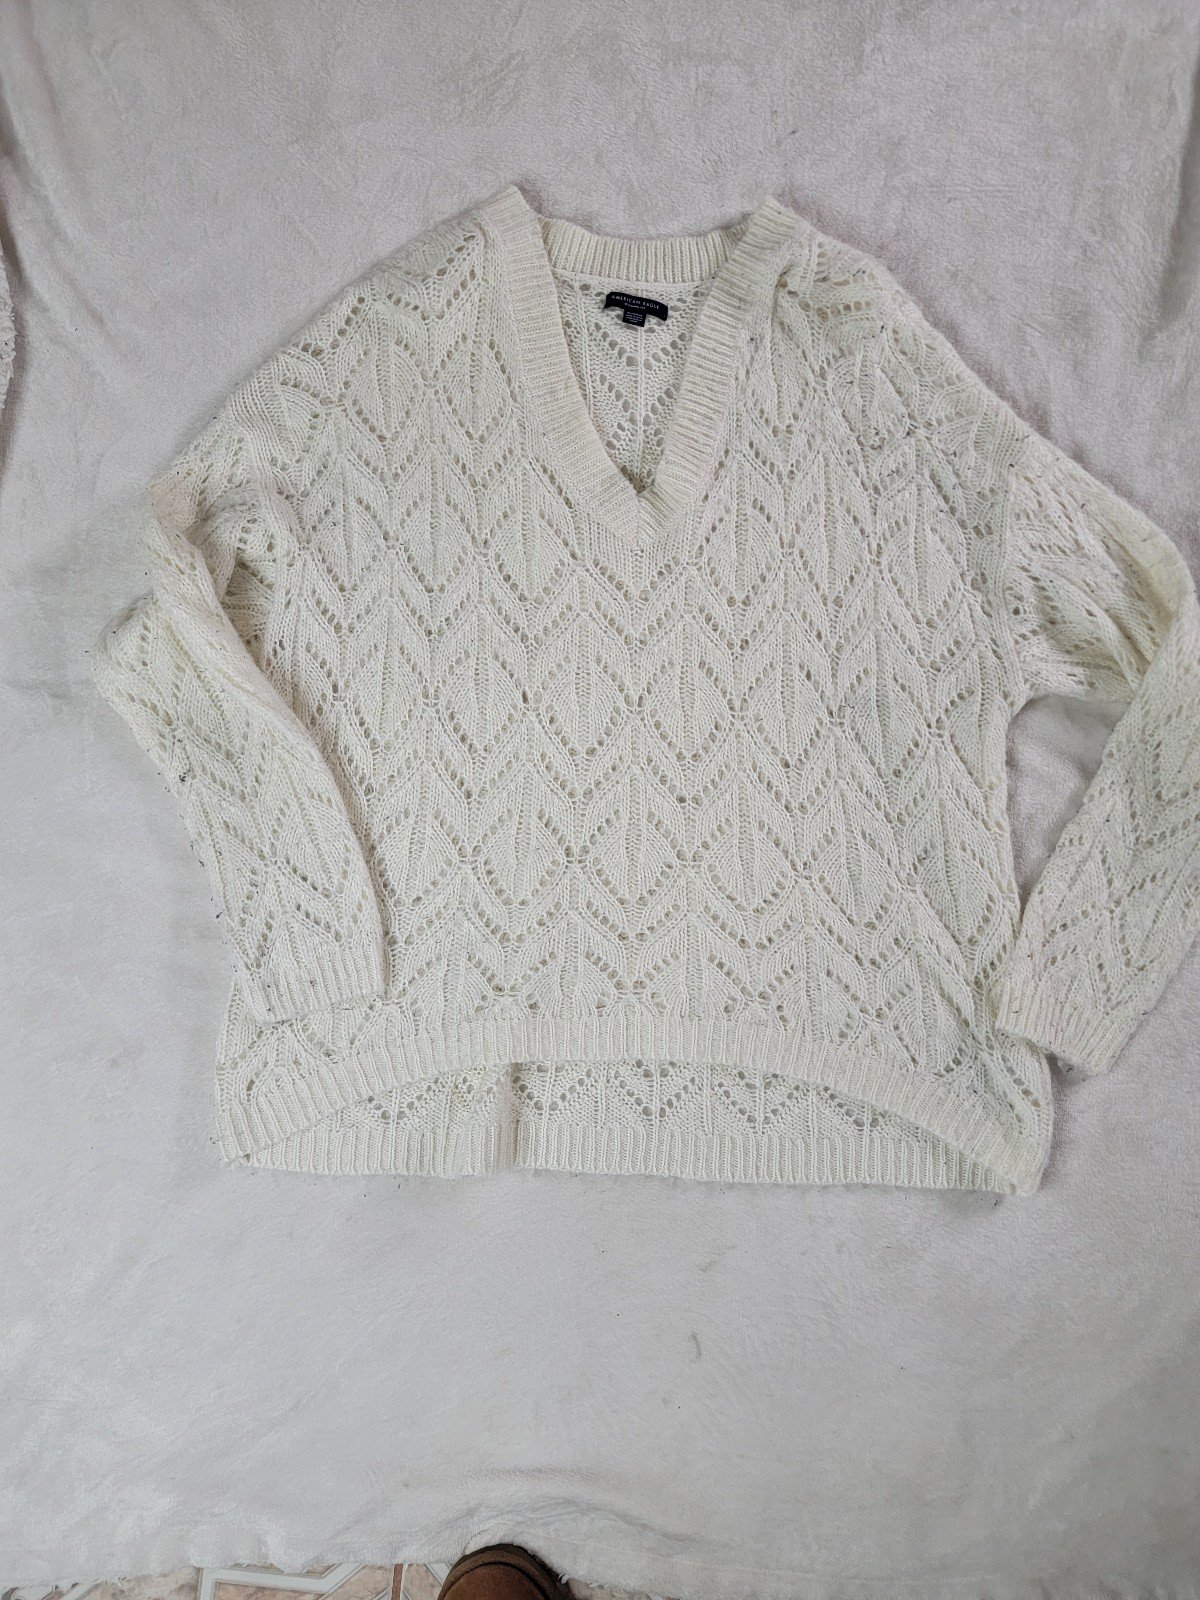 Amazing American eagle Sweater JgdznFFGR just buy it